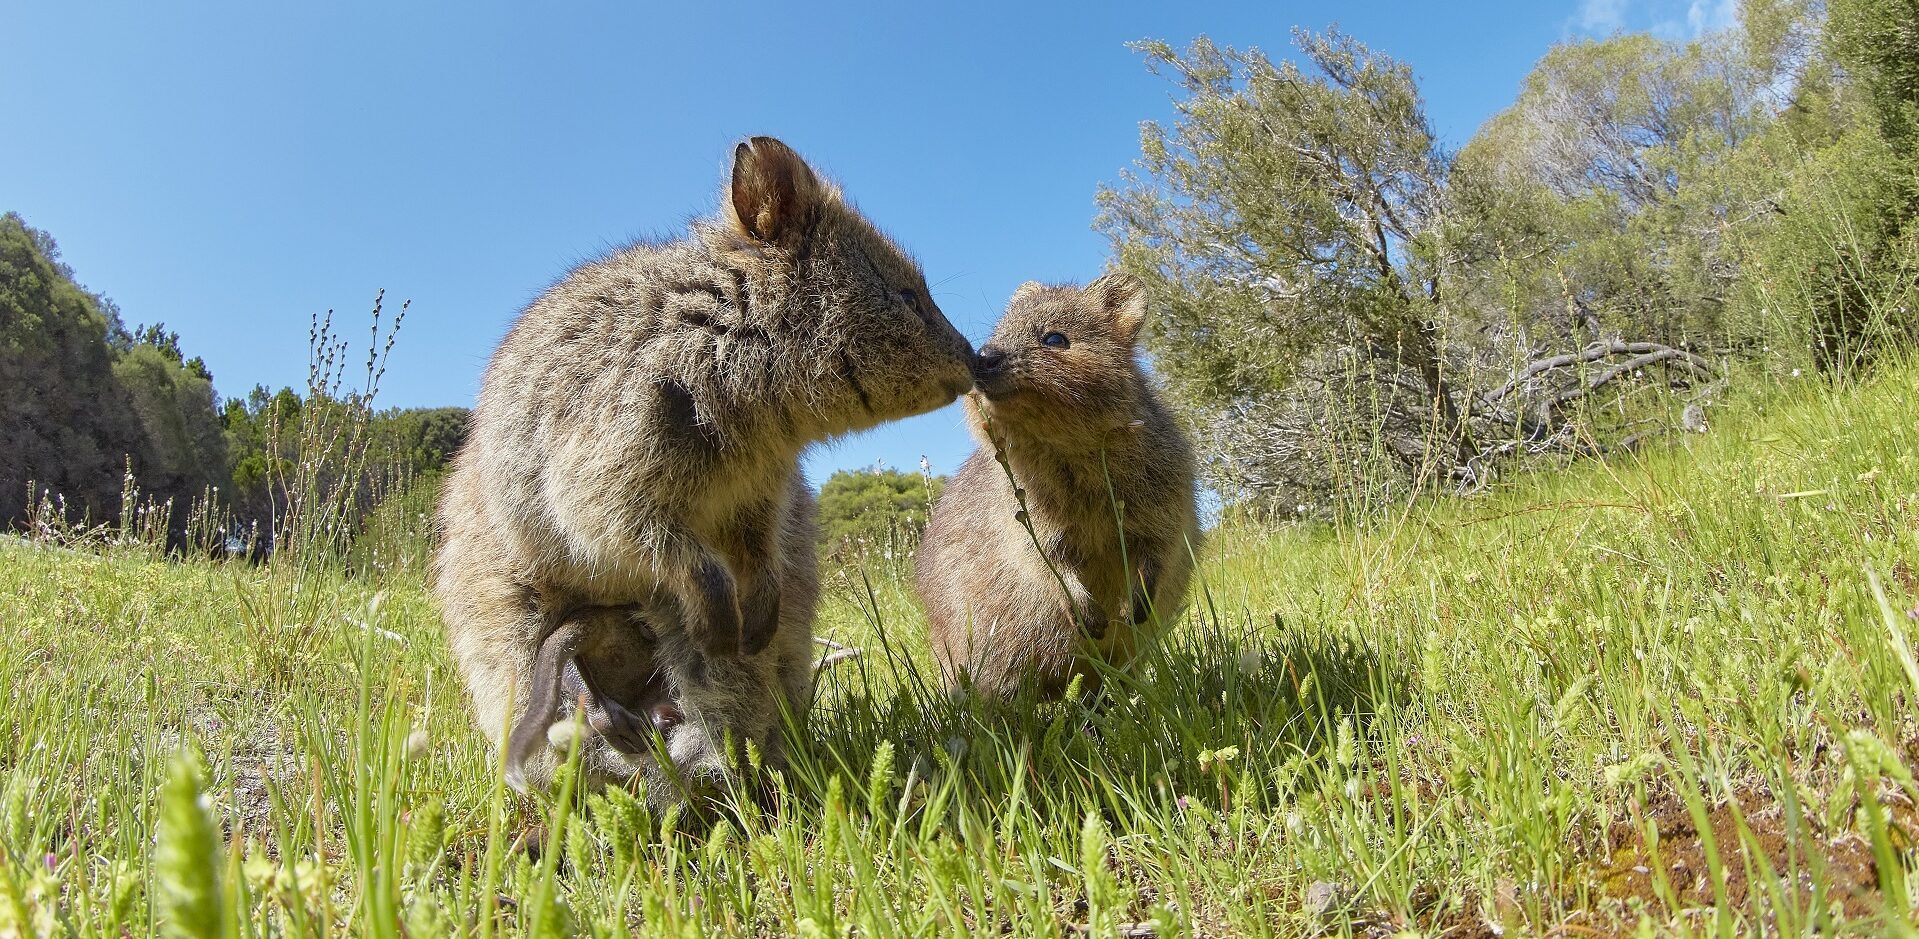 Quokkas in the grass at Rottnest Island